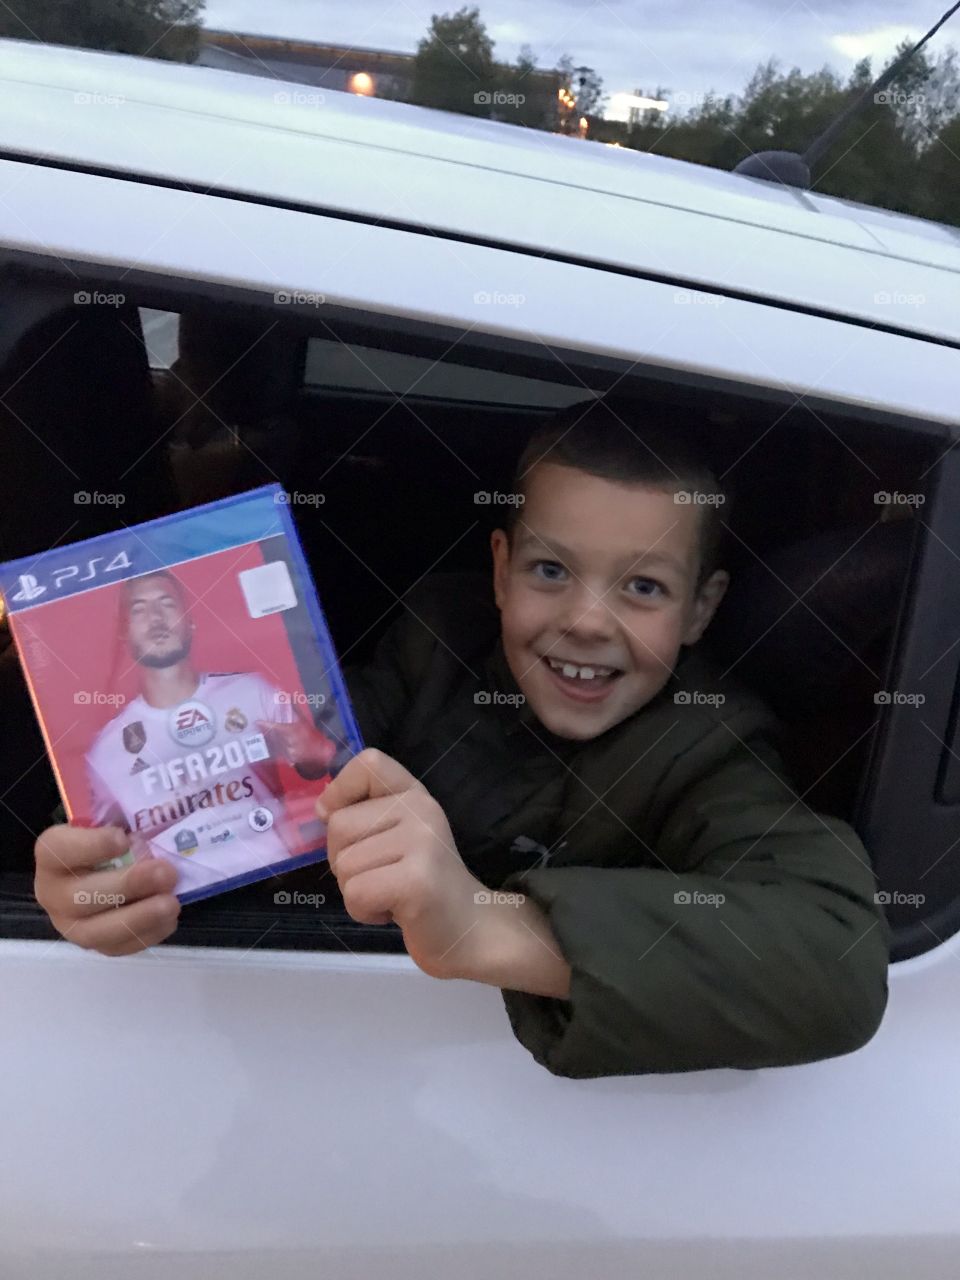 Release day of FIFA 20 in Sweden today. A happy boy